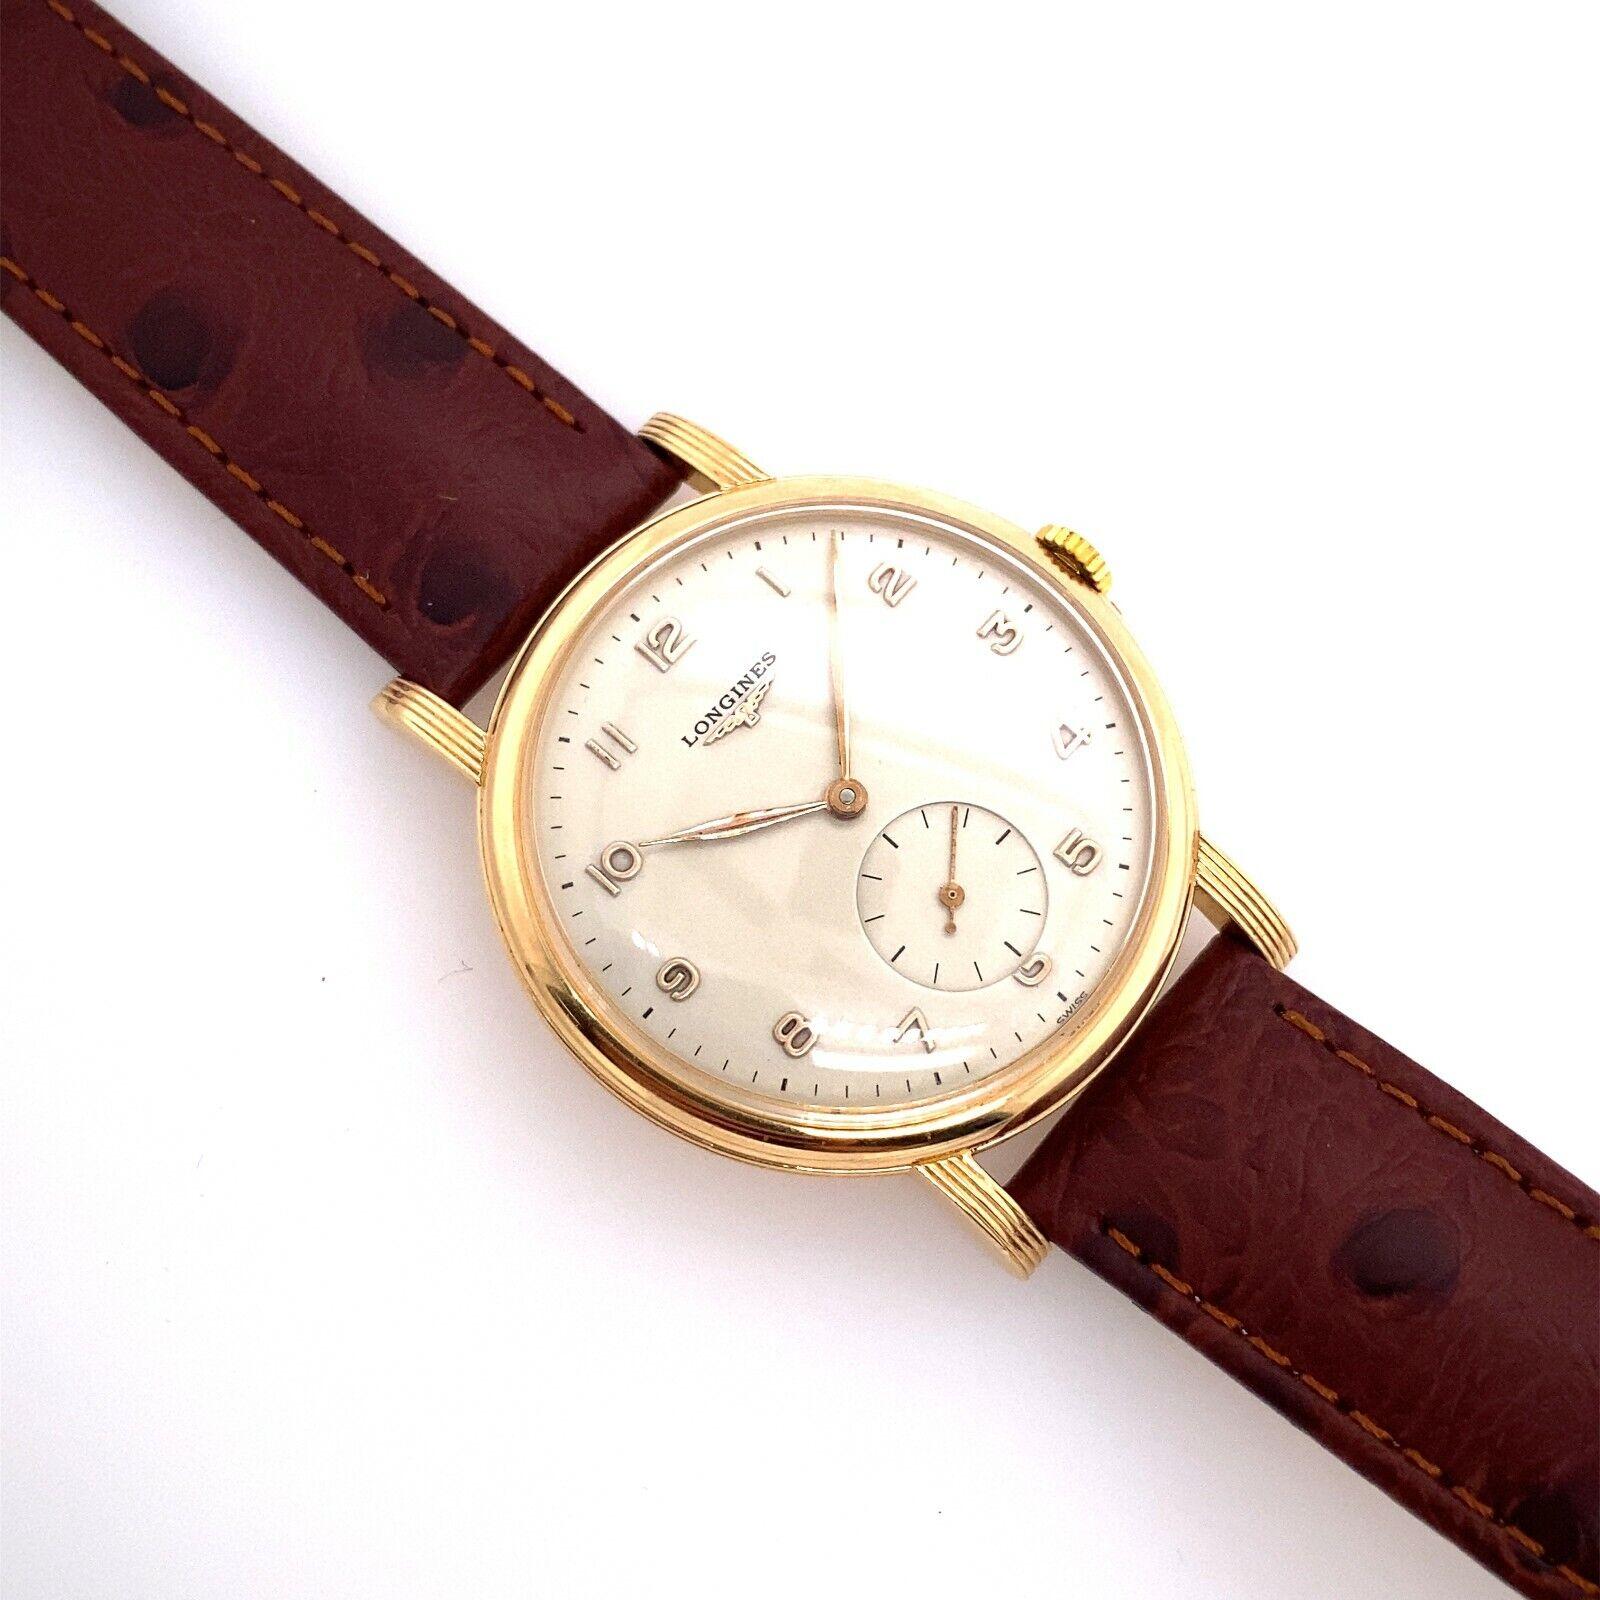 Vintage 18ct Rose/Yellow Gold 38mm Longines Mechanical Wristwatch

Additional Information:
Fully Serviced In Perfect Working Condition
Case Size: 38mm
Case Thickness: 8mm
Lug Width: 18 mm
Number of Jewels: 17
Case Material: 9ct gold
Total Weight: